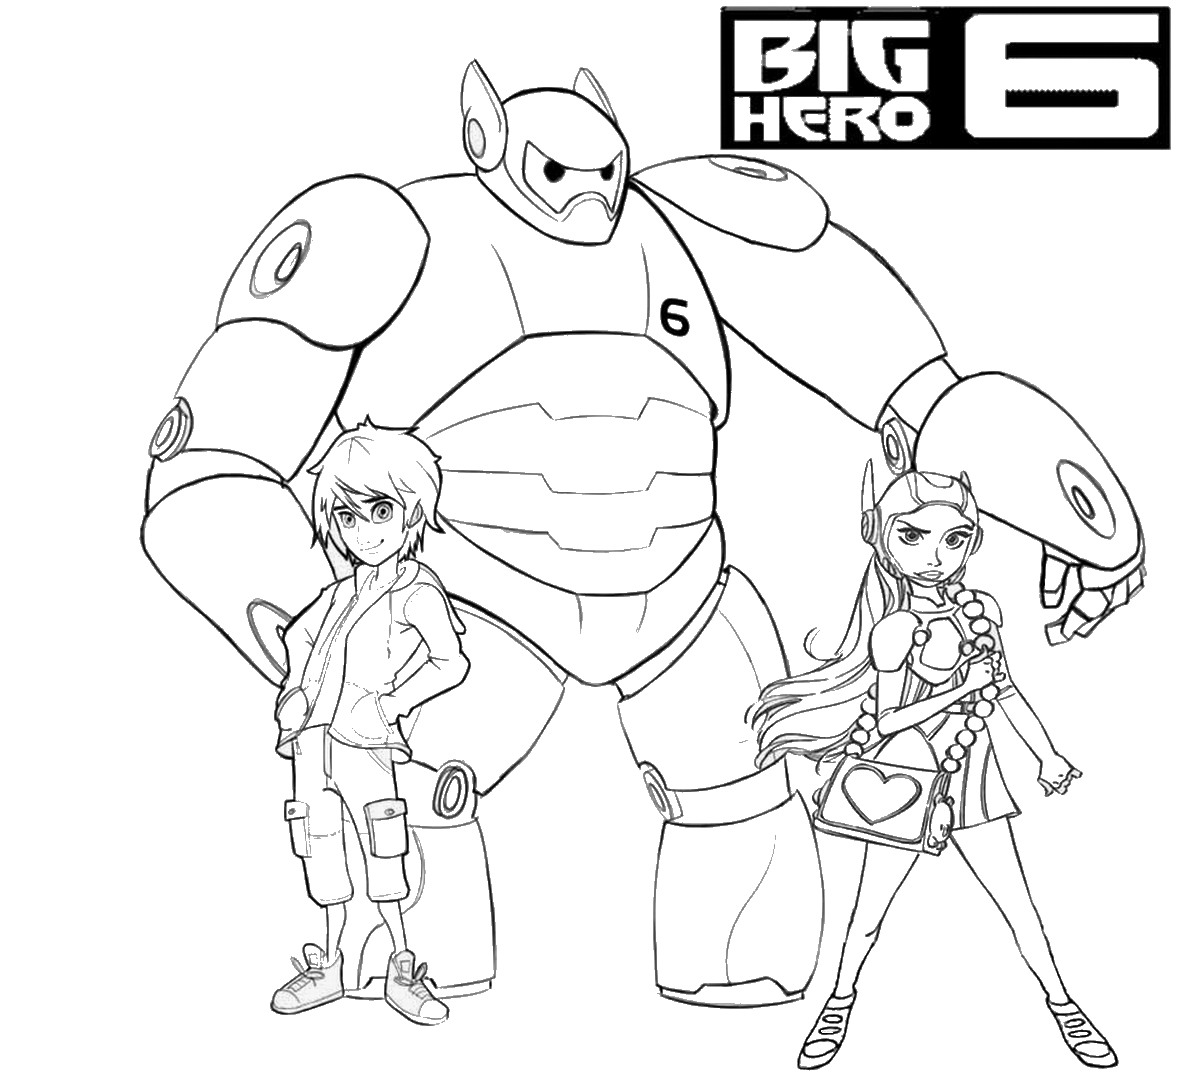 Big Hero 6 Coloring Pages For Kids